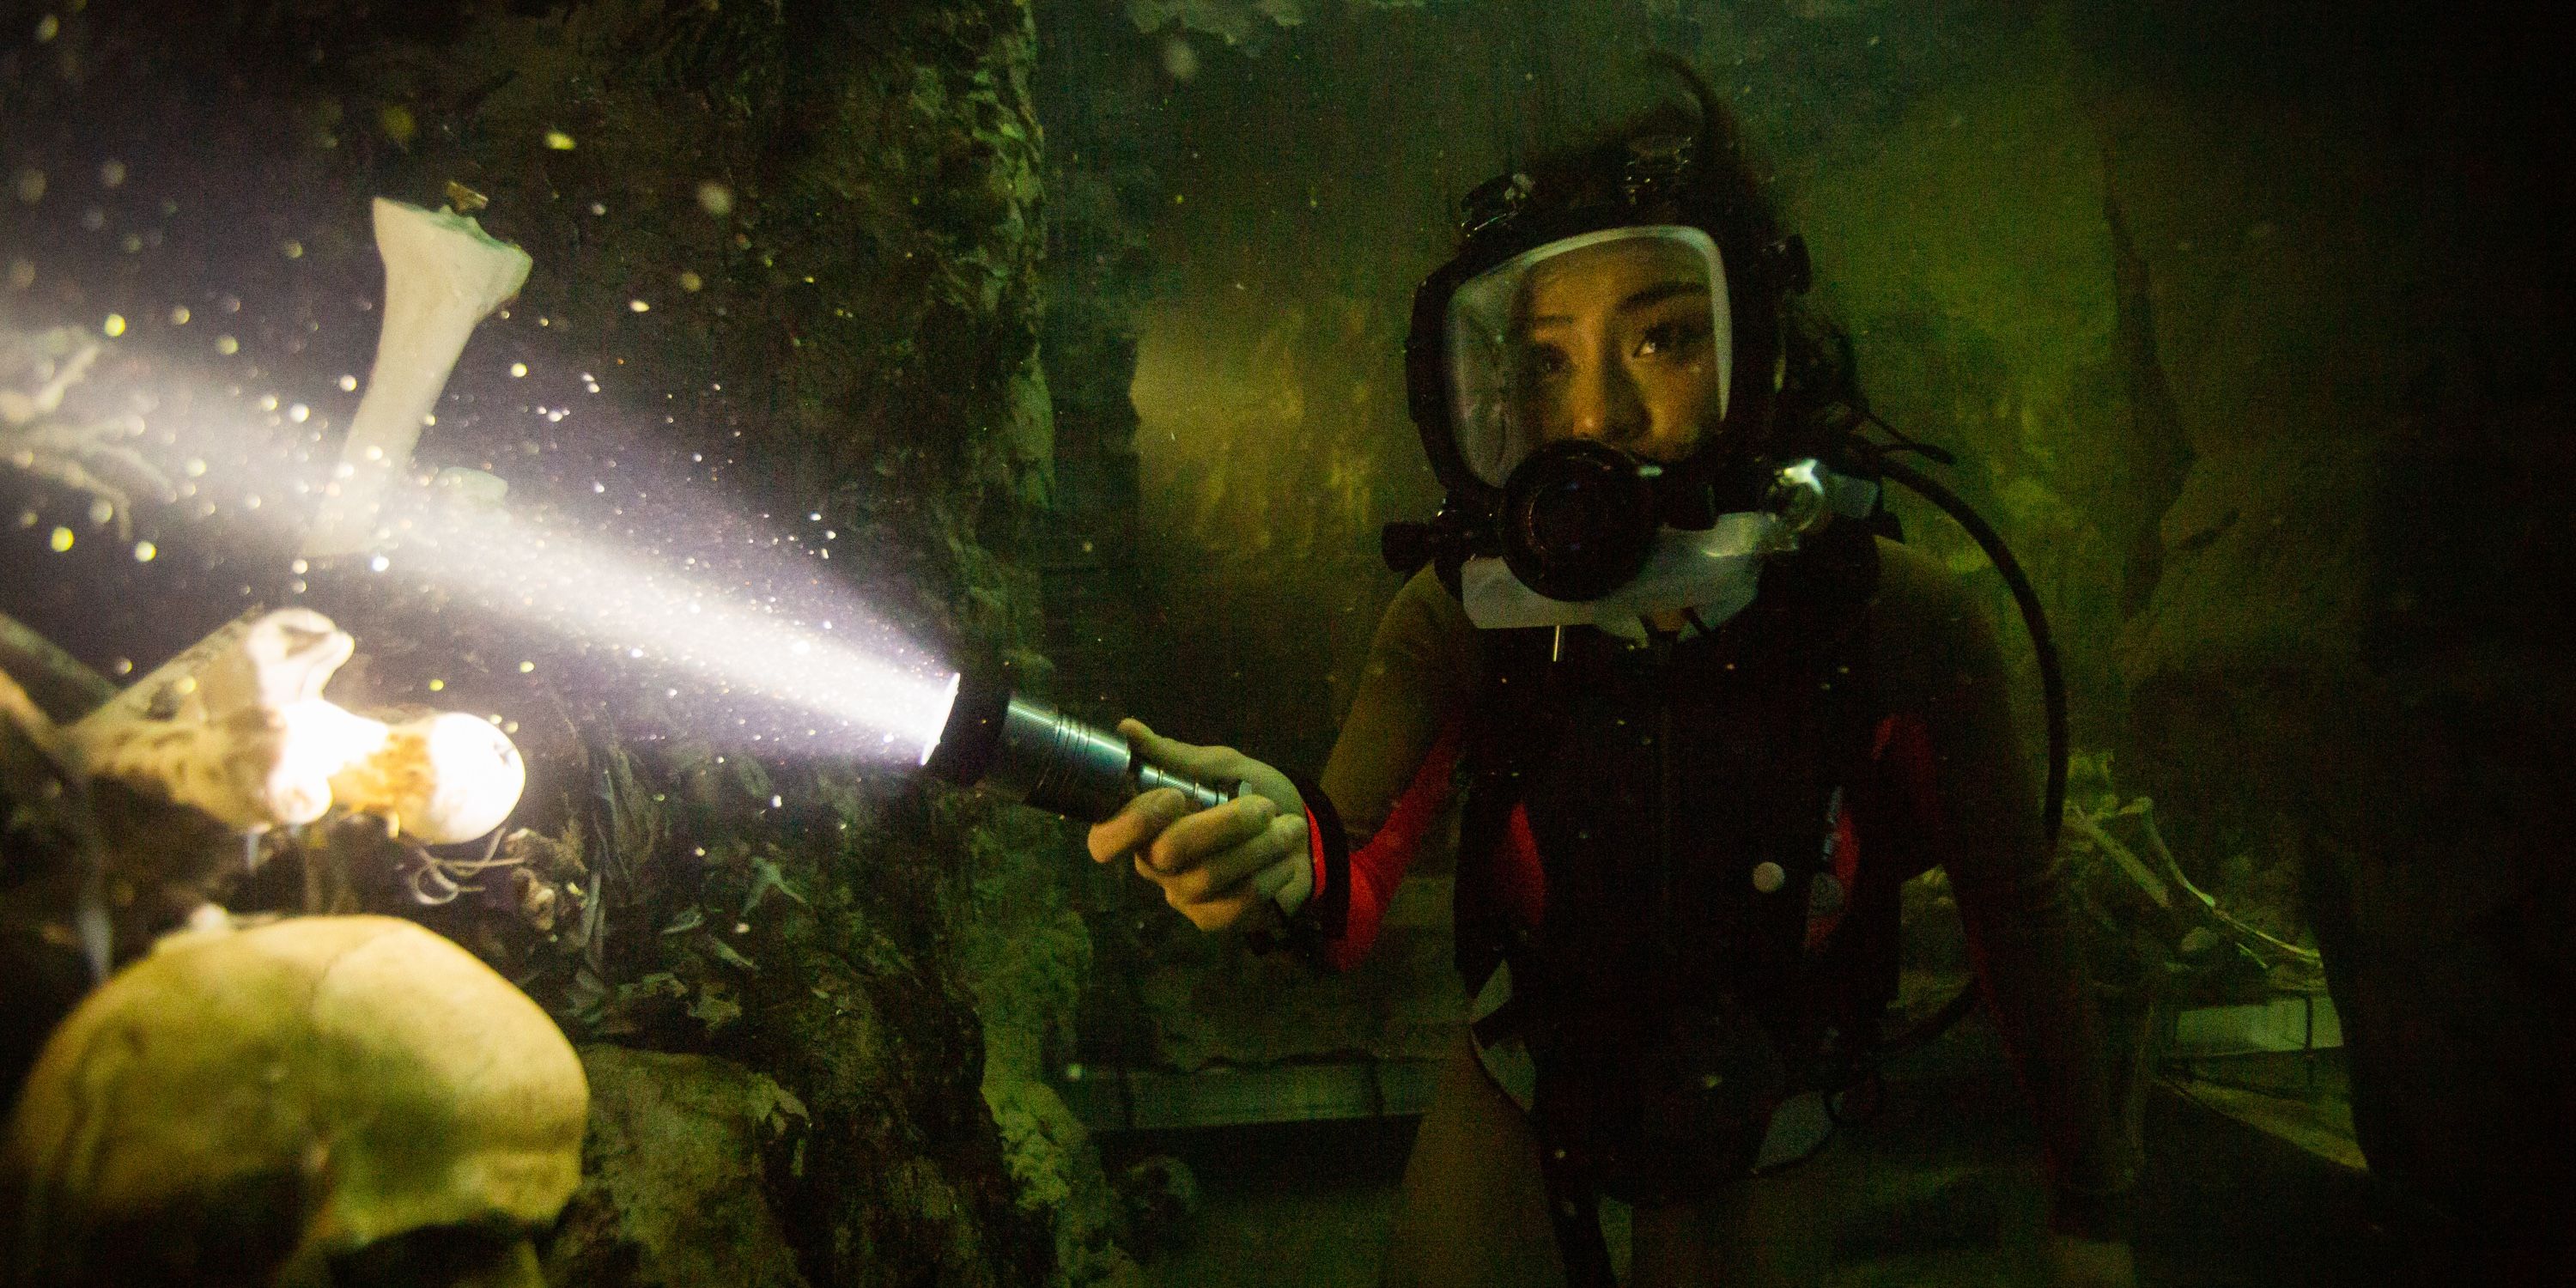 A woman shines a flashlight underwater in 47 Meters Down Uncaged 